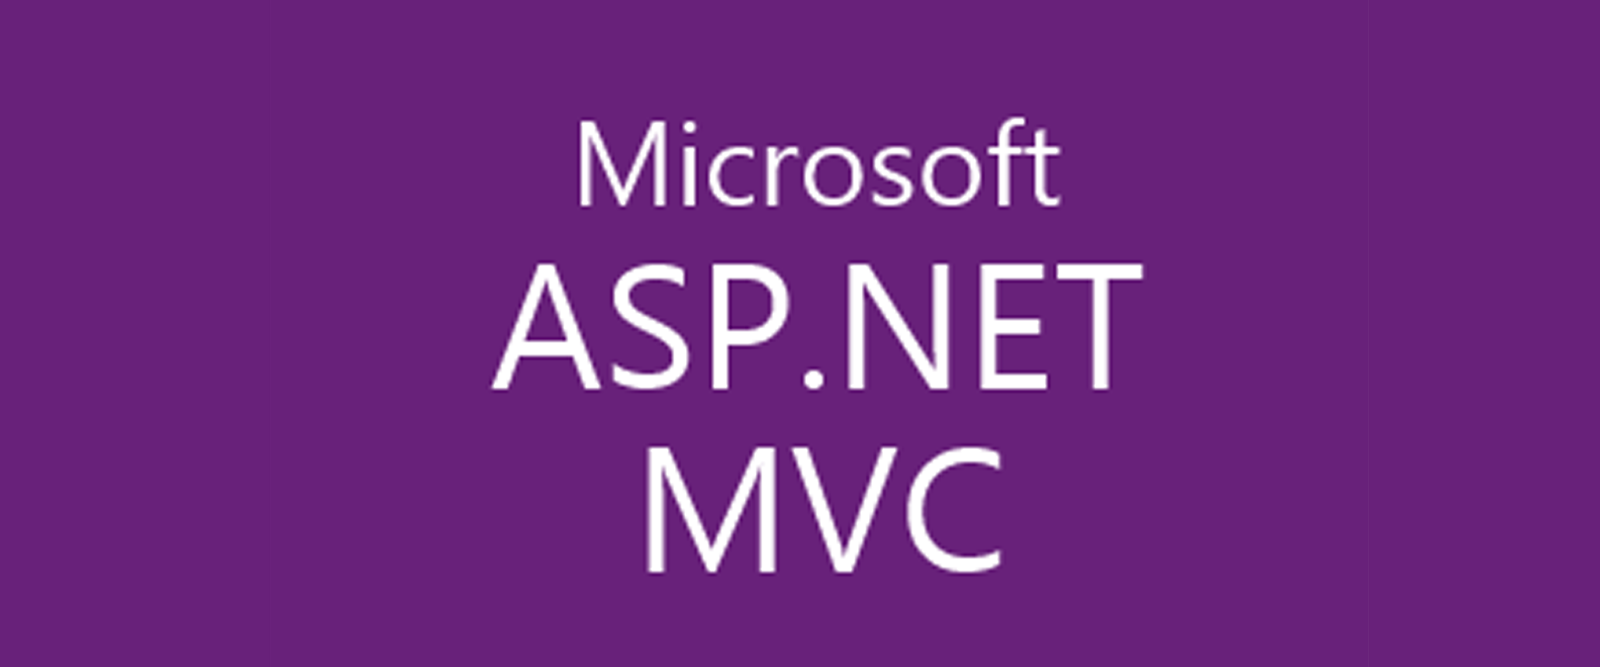 cheap-asp-net-tutorial-what-is-asp-net-mvc-and-why-should-i-use-it